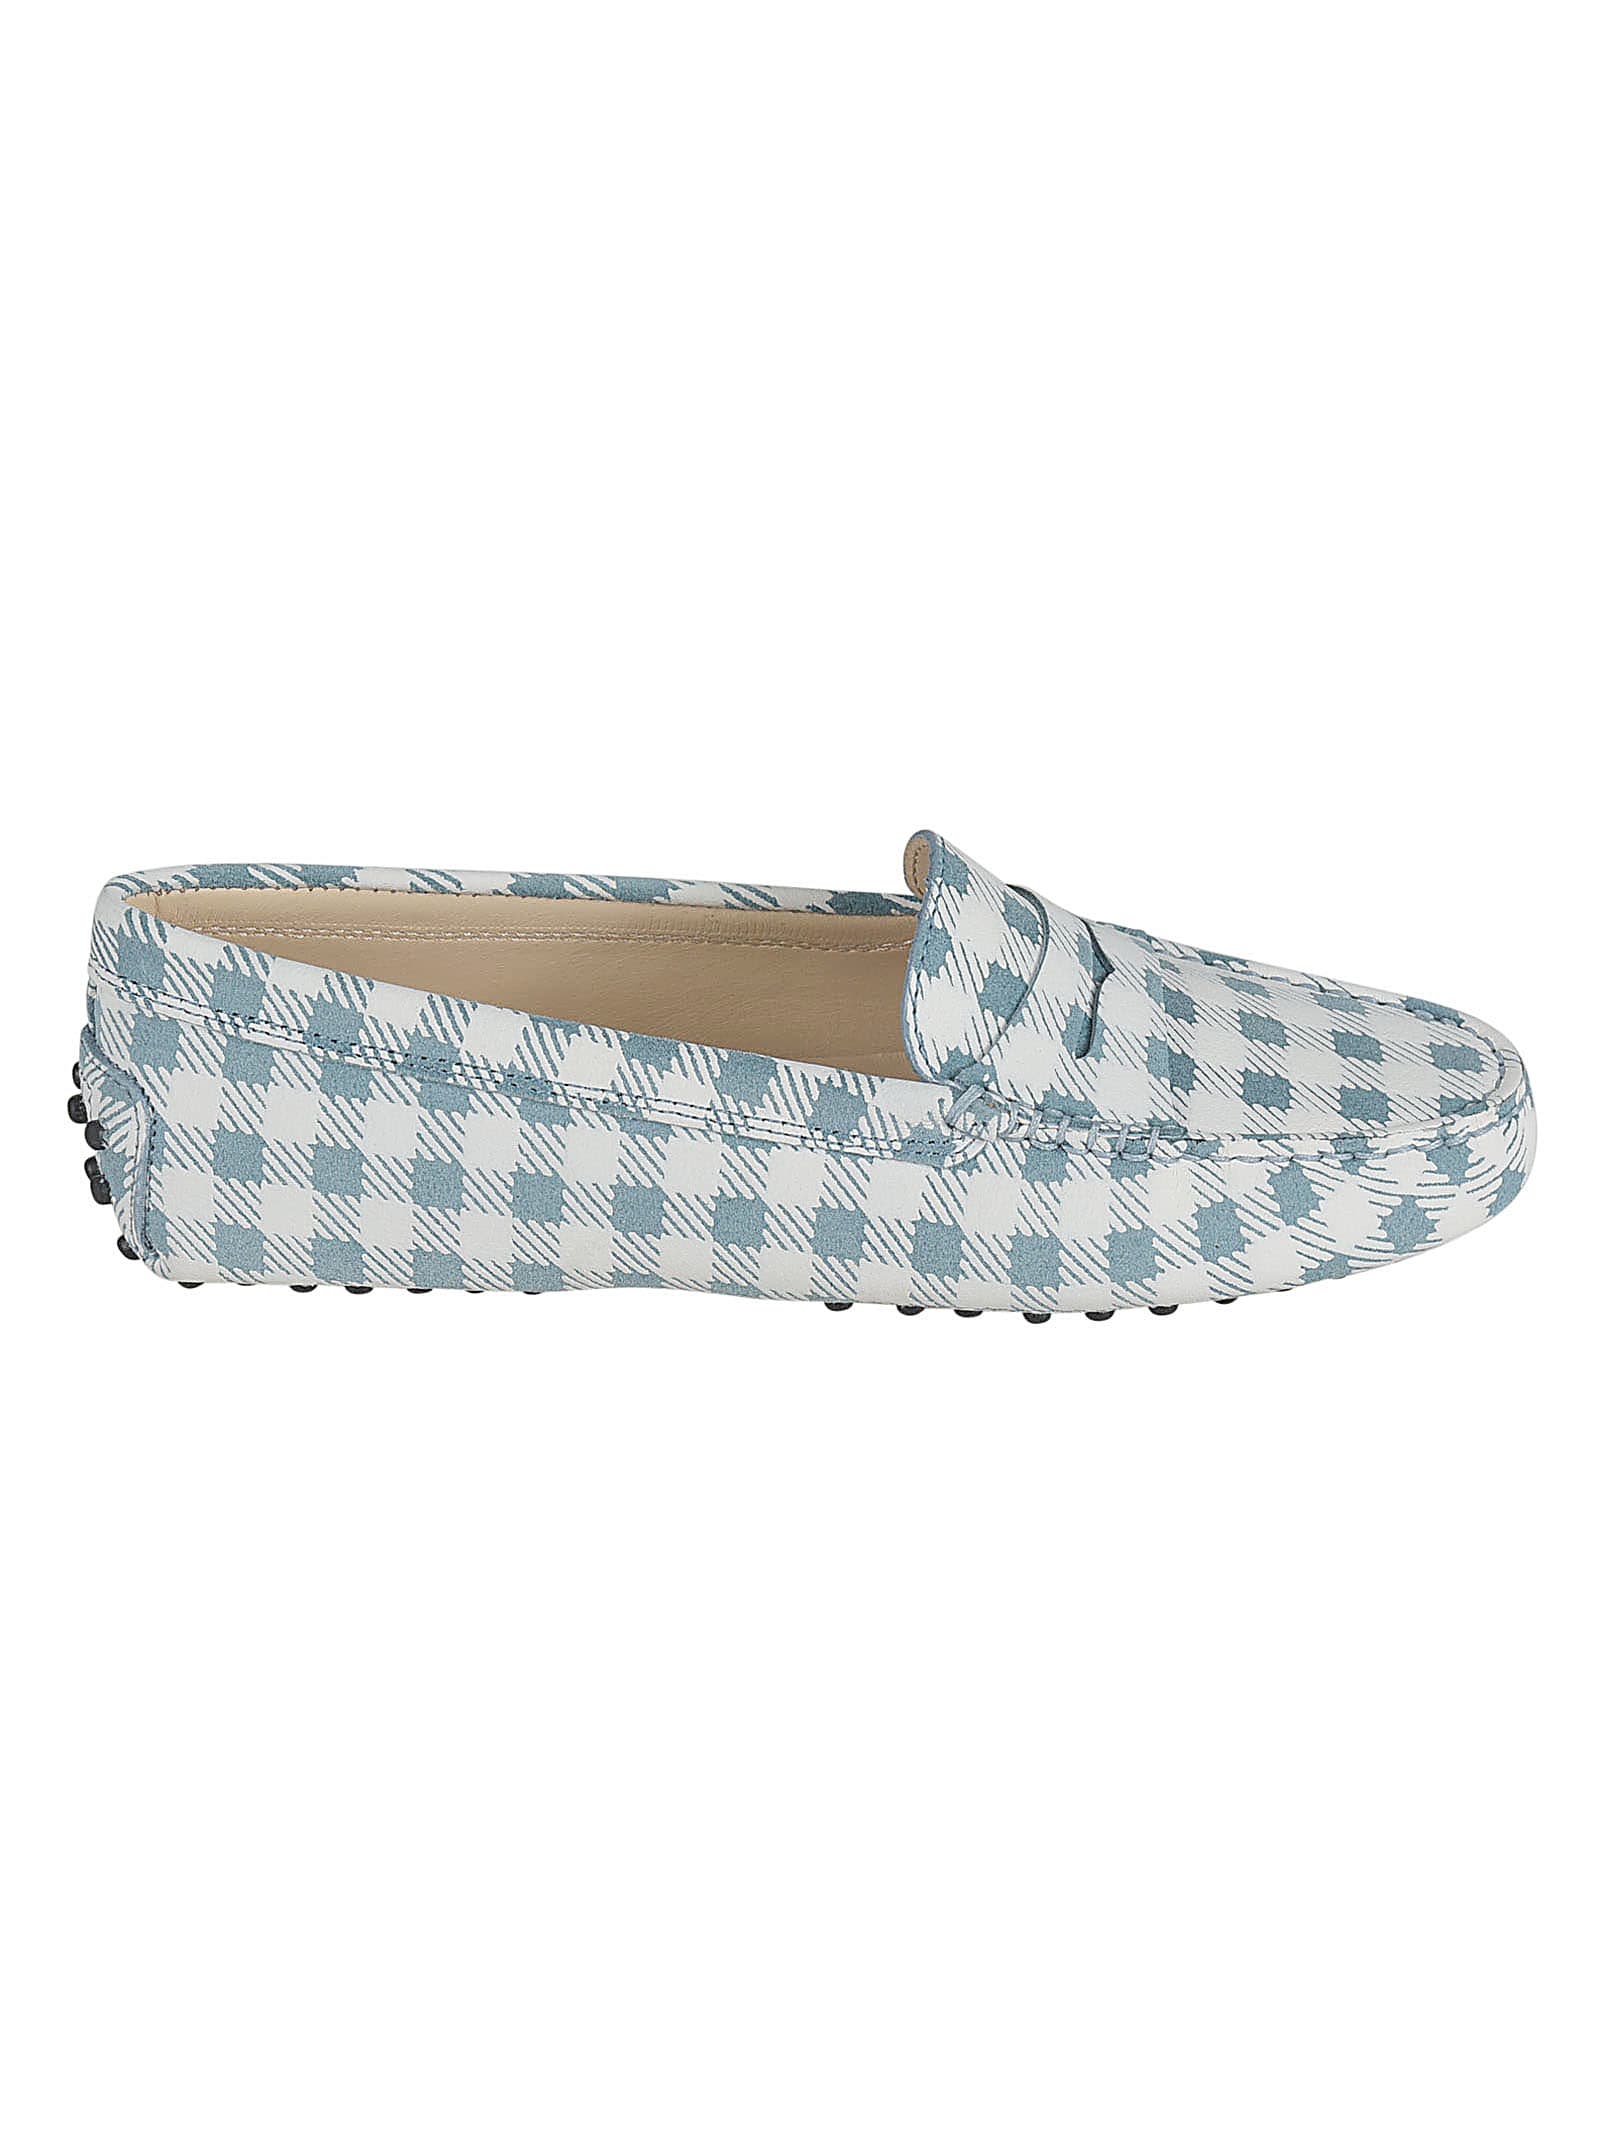 Buy Tods Checked Loafers online, shop Tods shoes with free shipping